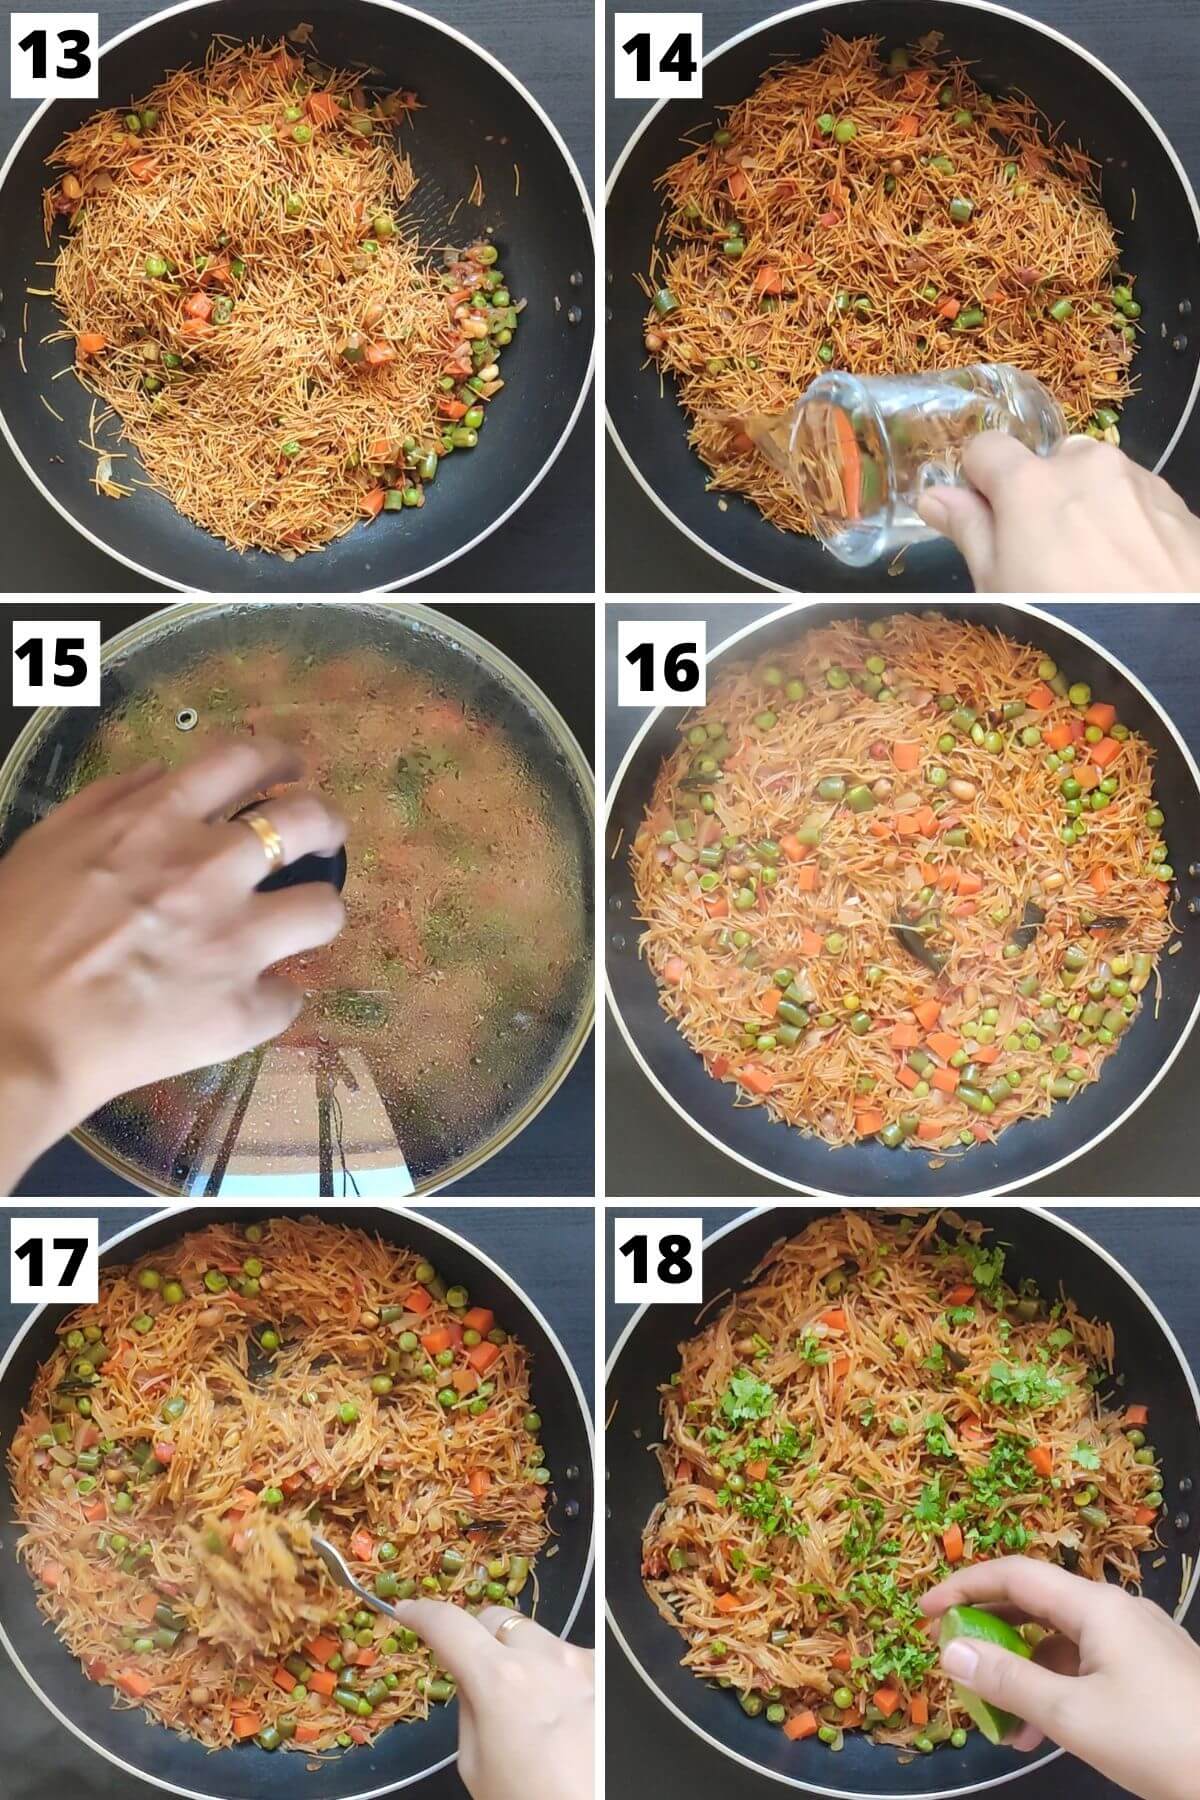 Vermicelli pulao making steps